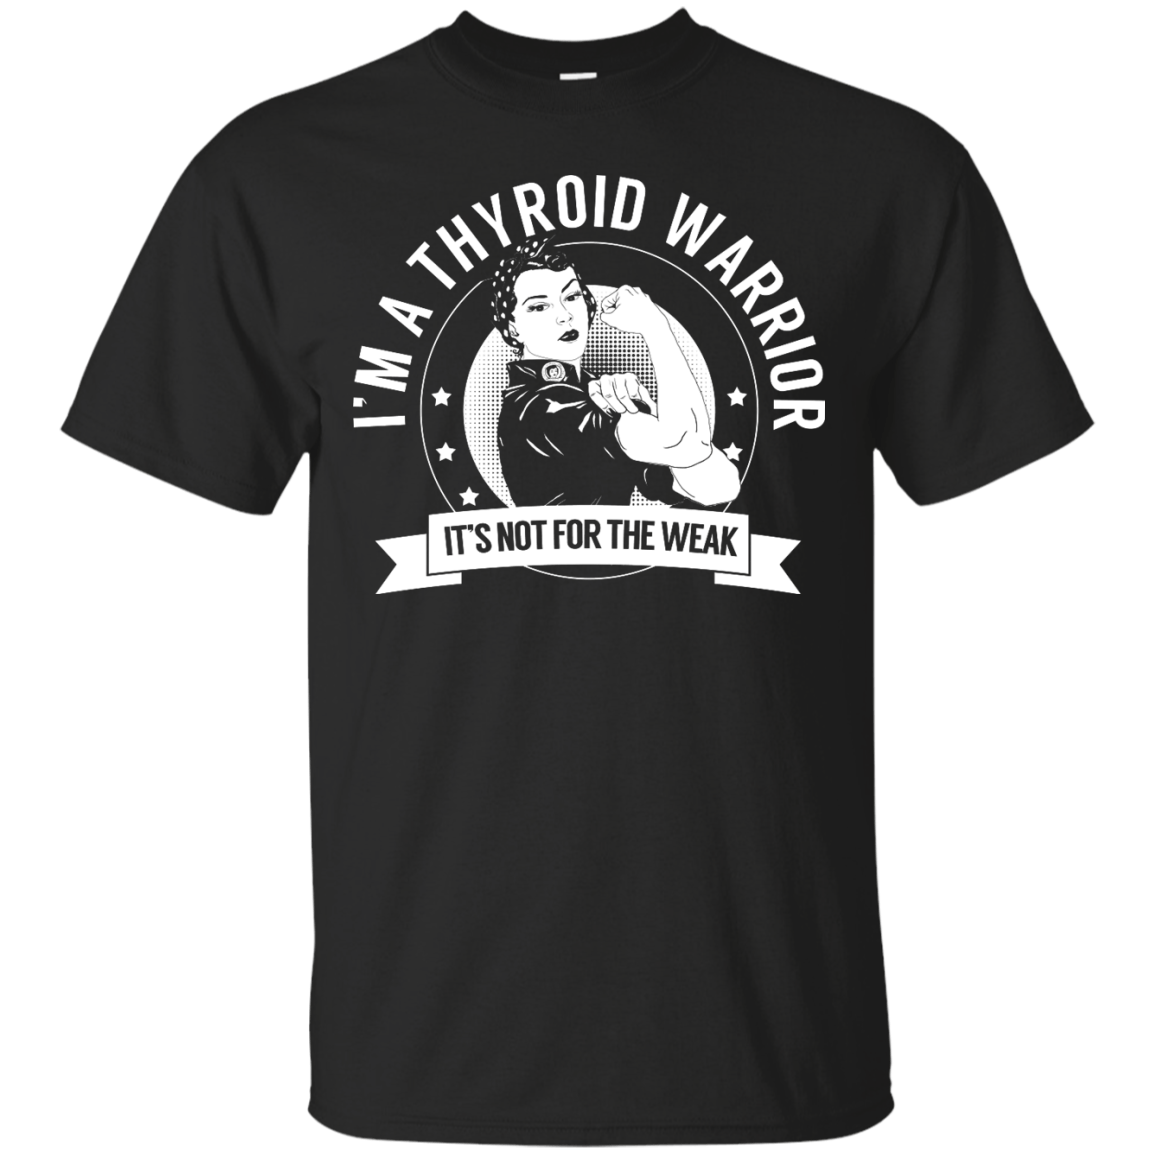 Thyroid Disease - Thyroid Warrior Not for the Weak Unisex Shirt - The Unchargeables